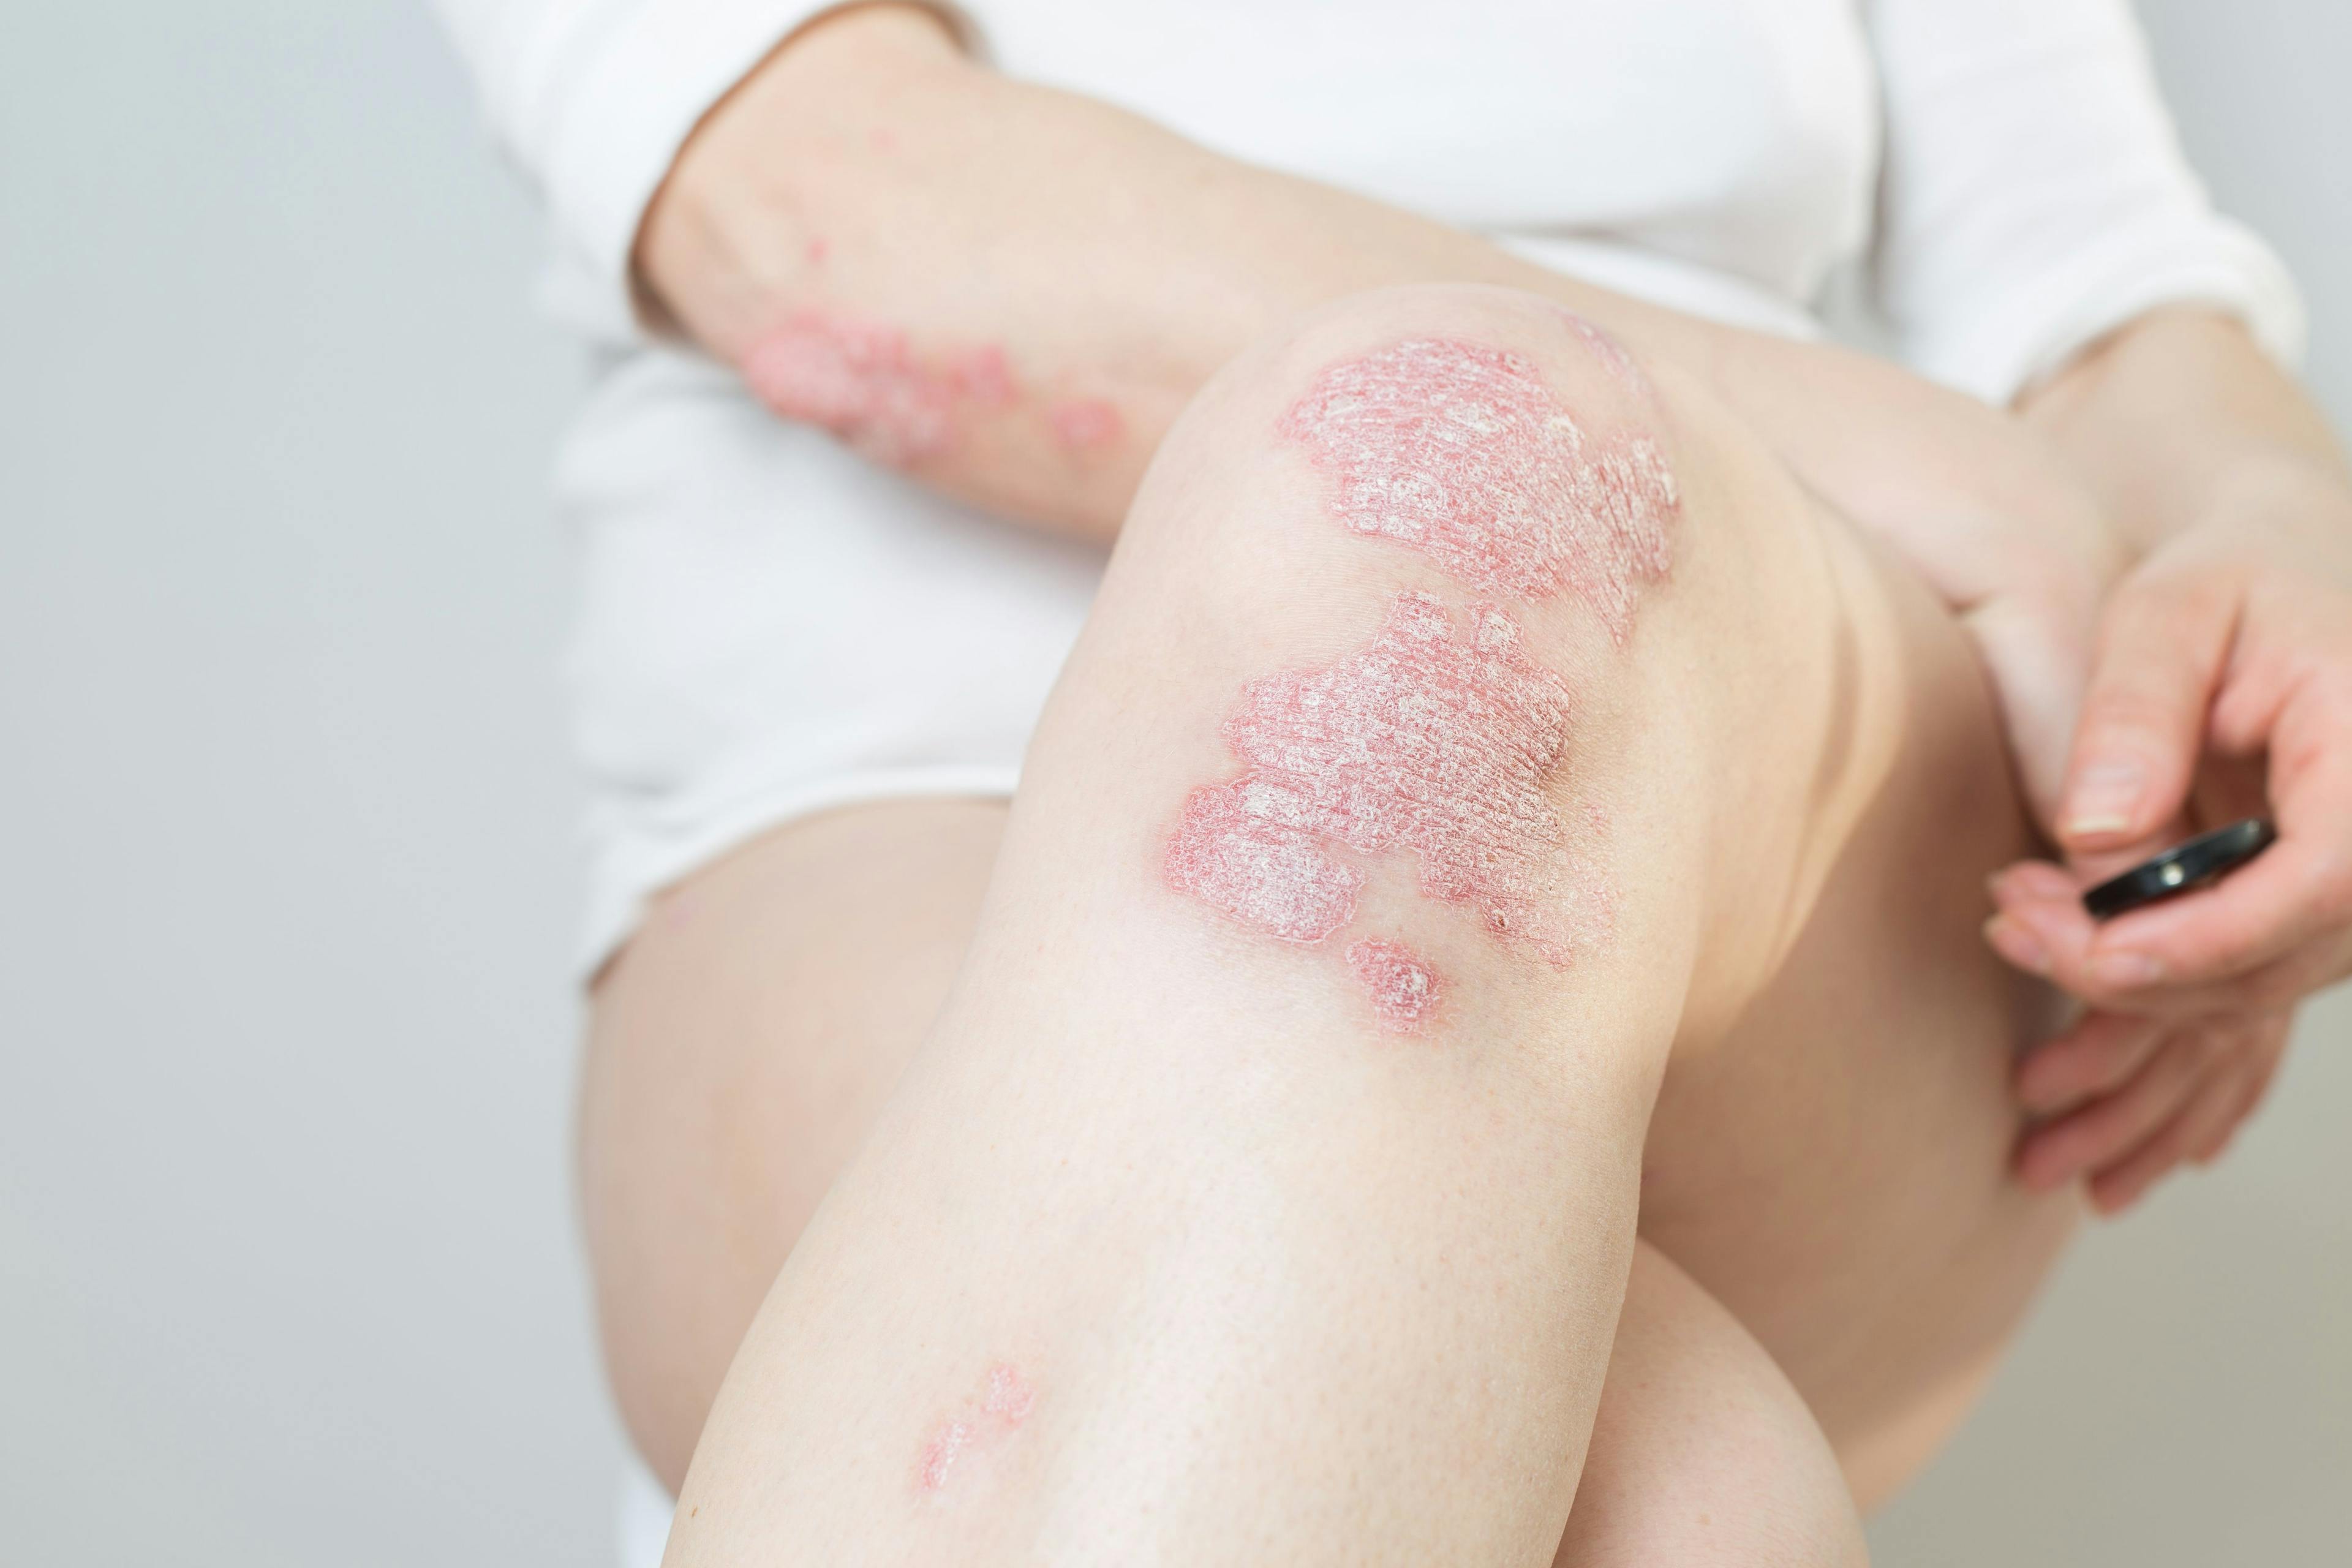 cute psoriasis on the knees ,body ,elbows is an autoimmune incurable dermatological skin disease. | Image Credit: SNAB - stock.adobe.com